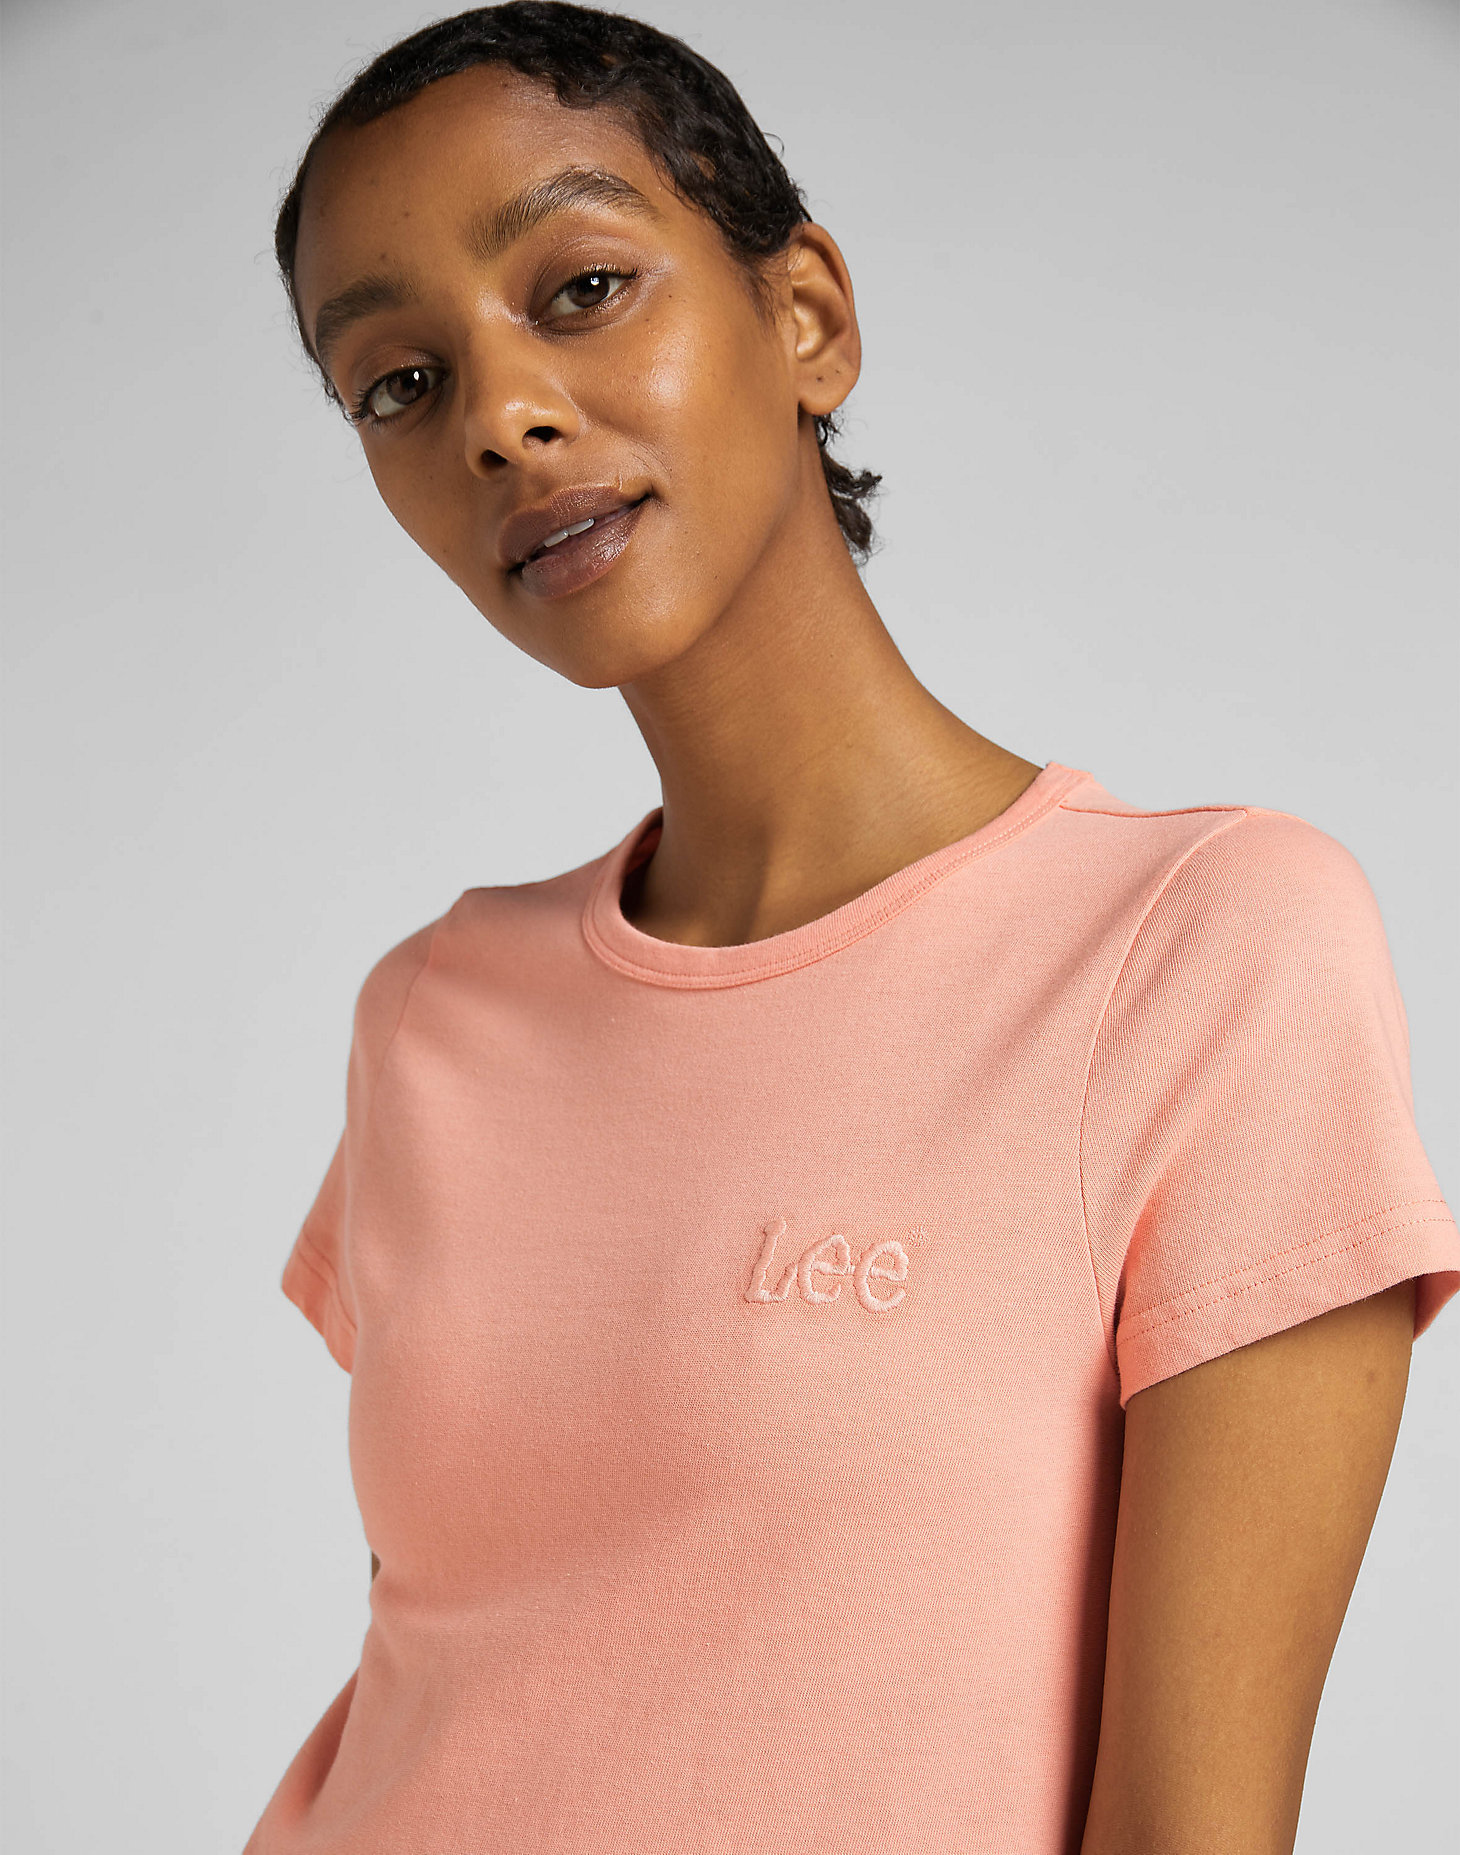 Slim Cropped Tee in Bright Coral alternative view 4